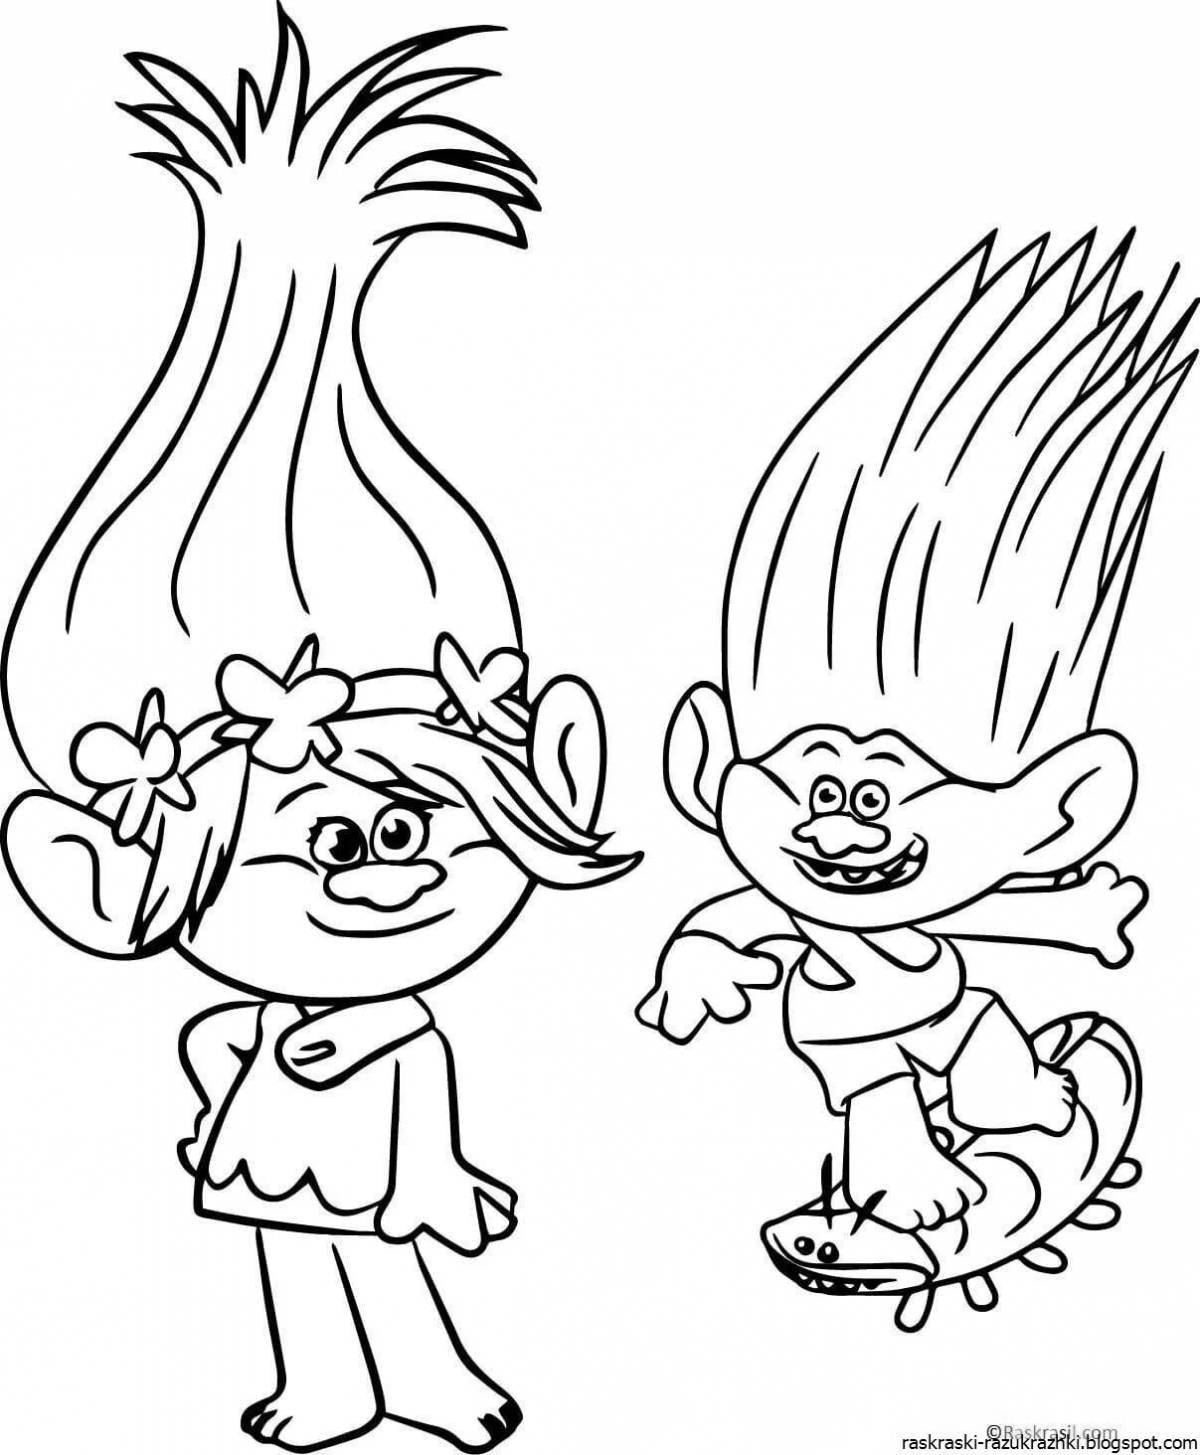 Naughty coloring pages of children's trolls